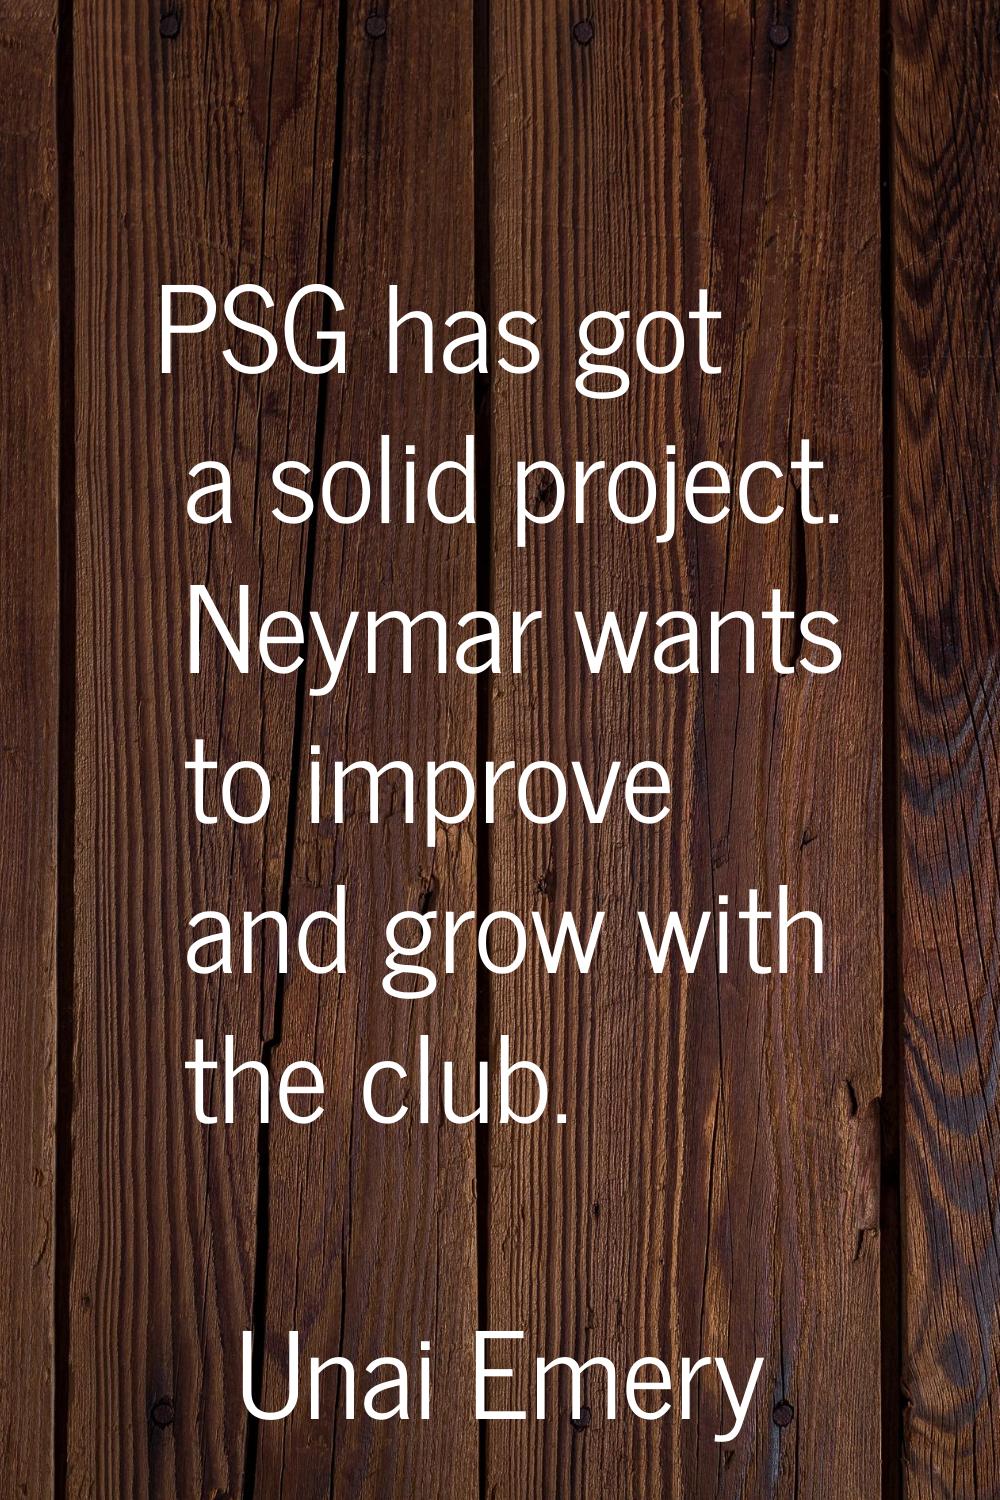 PSG has got a solid project. Neymar wants to improve and grow with the club.